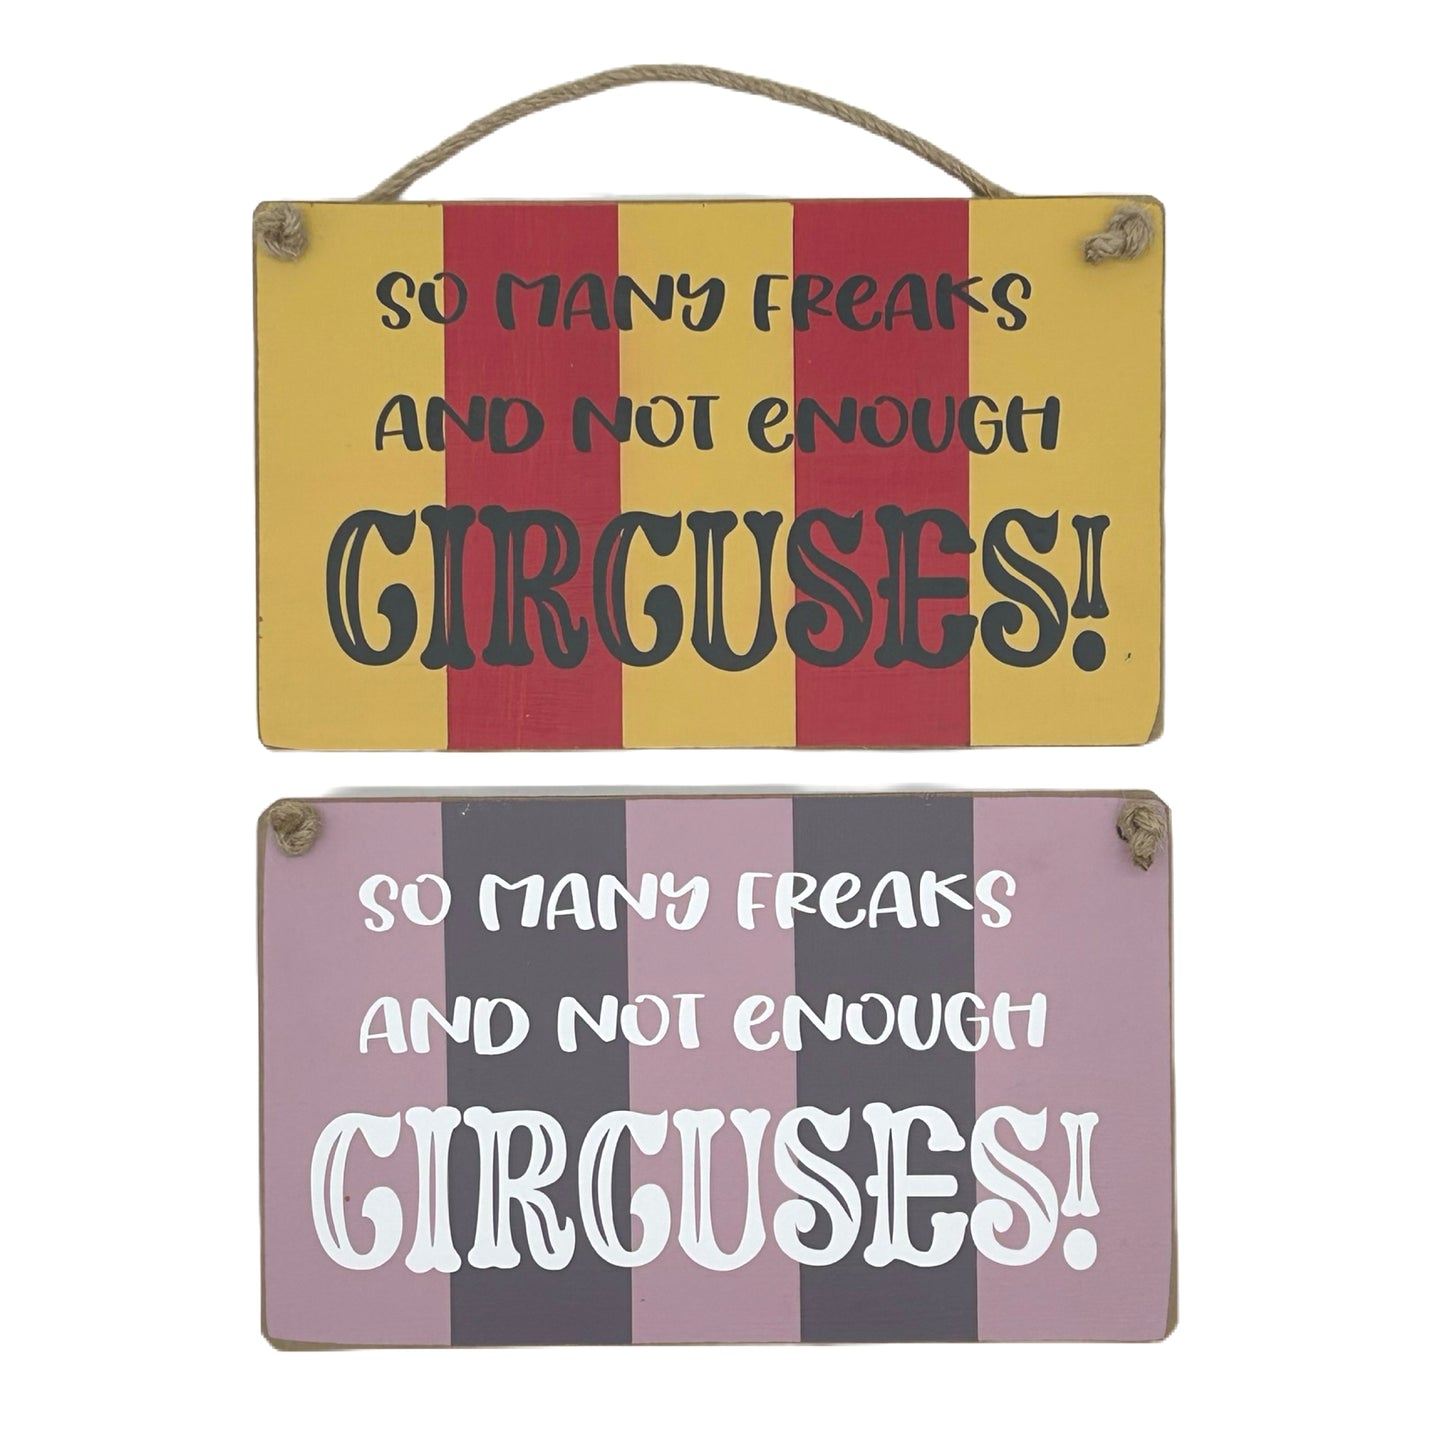 So many freaks and not enough Circuses Carnival Hanging plaque